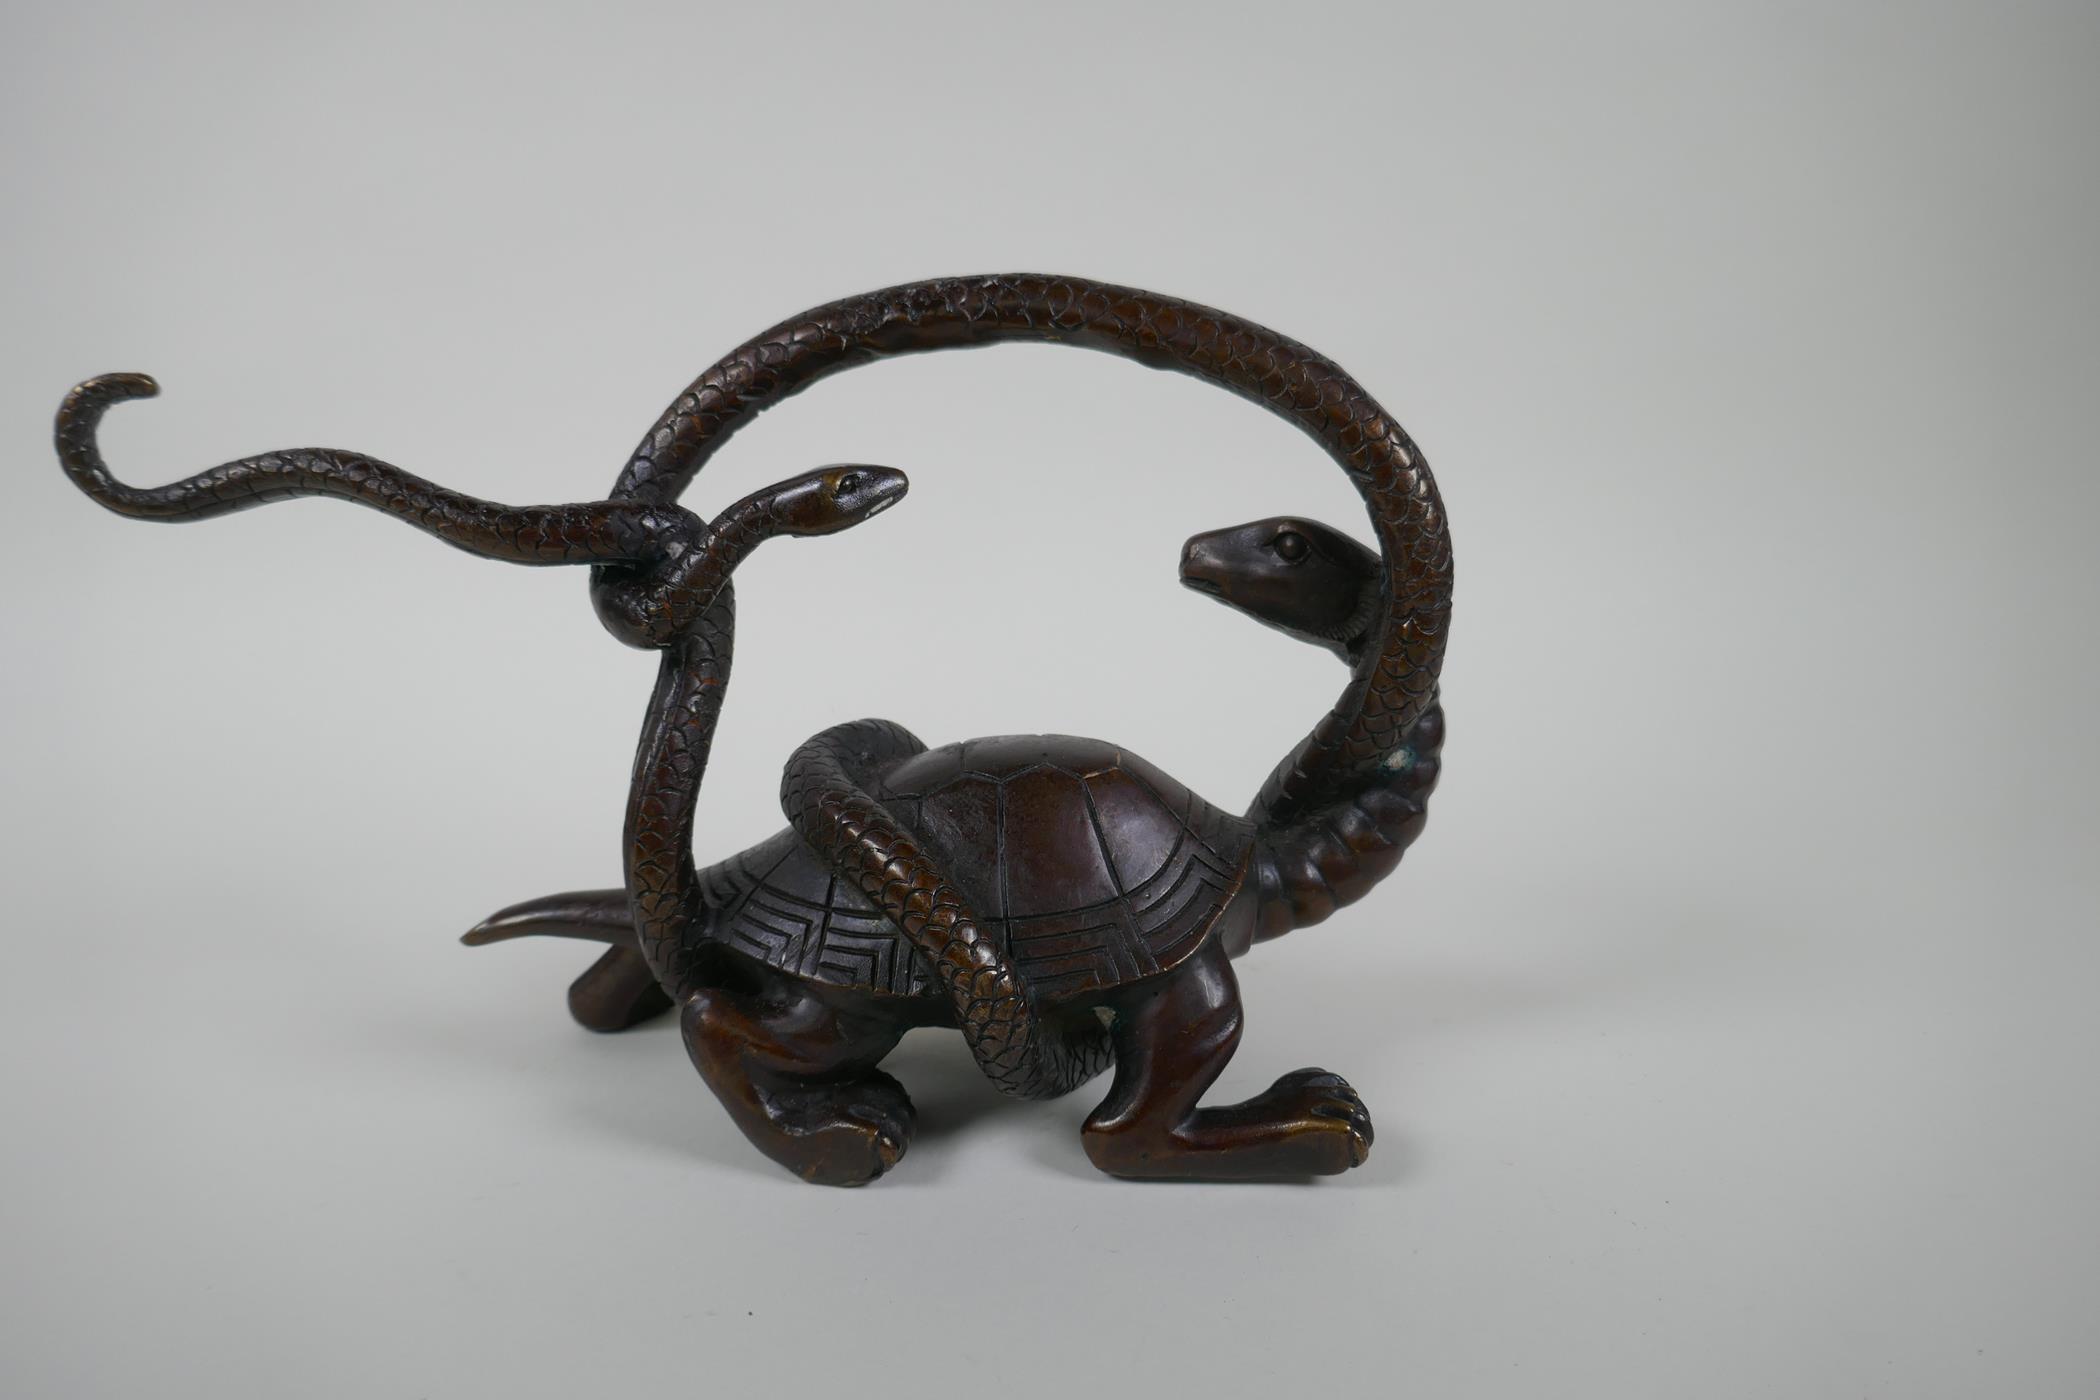 A Chinese filled bronzed metal tortoise entwined with a snake, 26cm long, 17cm high - Image 2 of 3